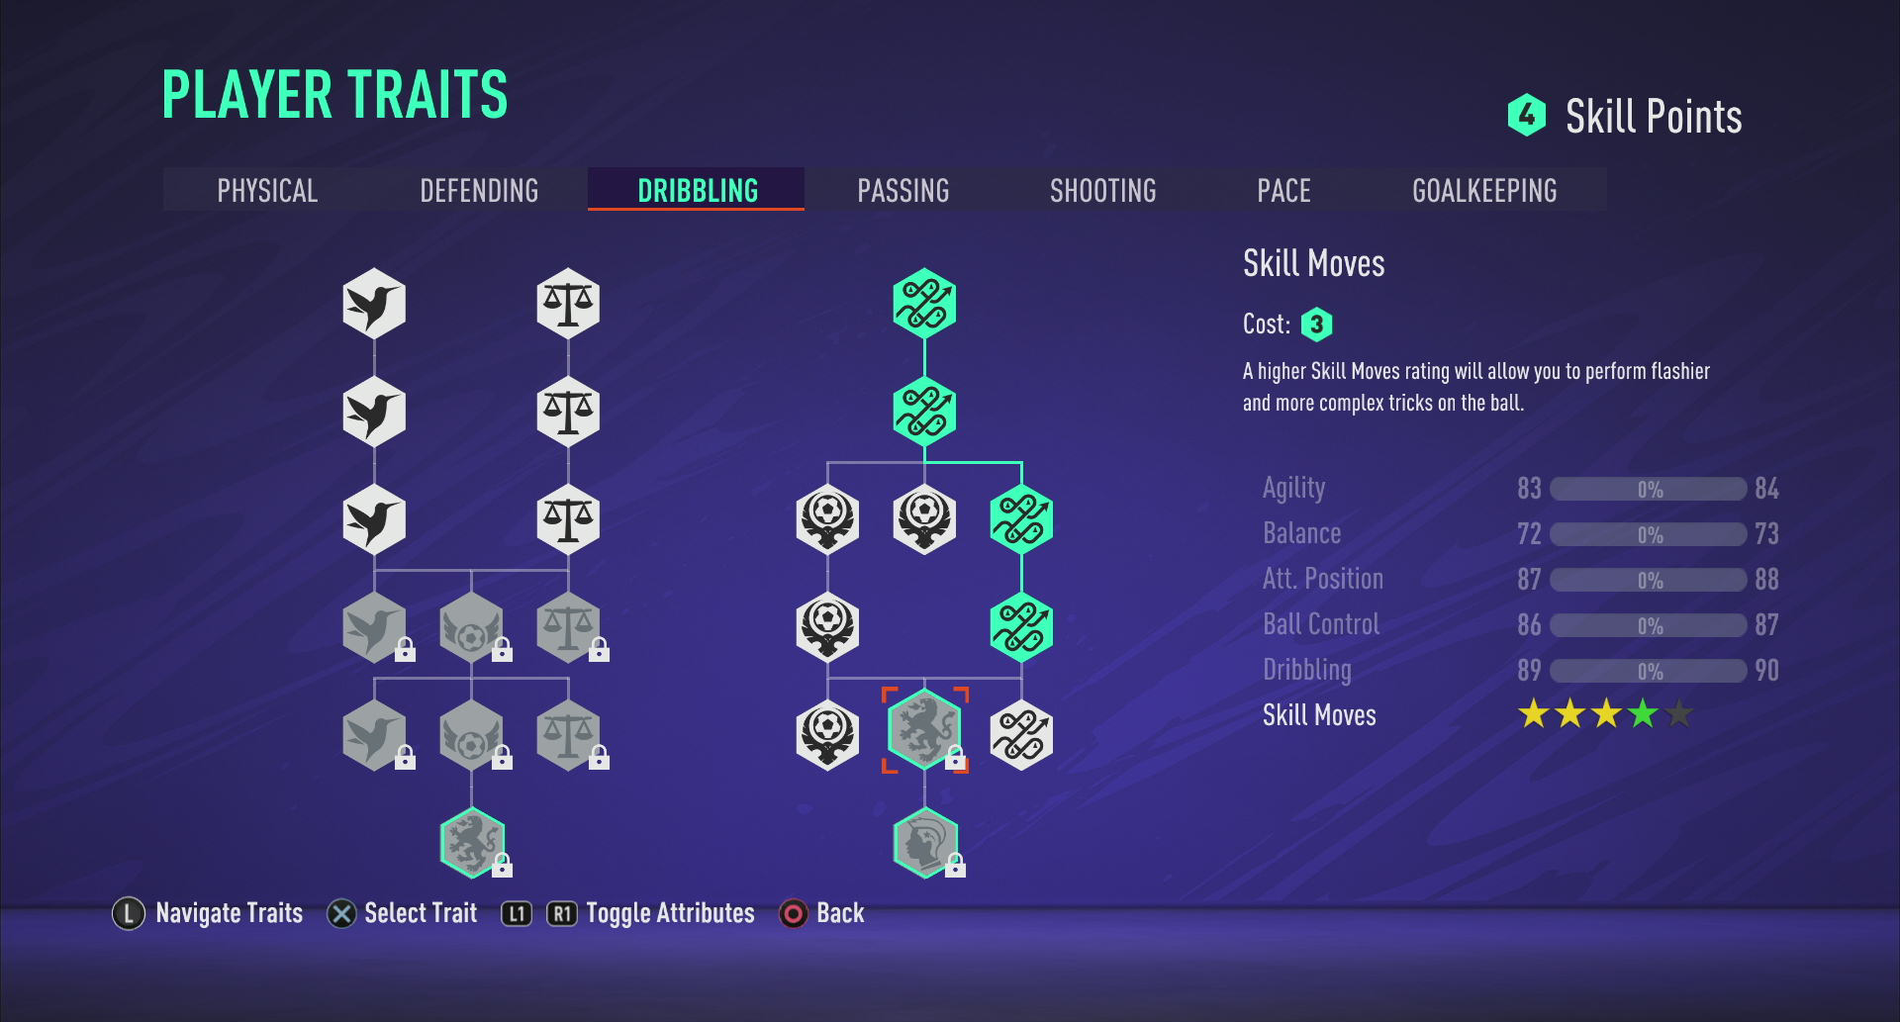 Best Pro Club Builds In FIFA 23